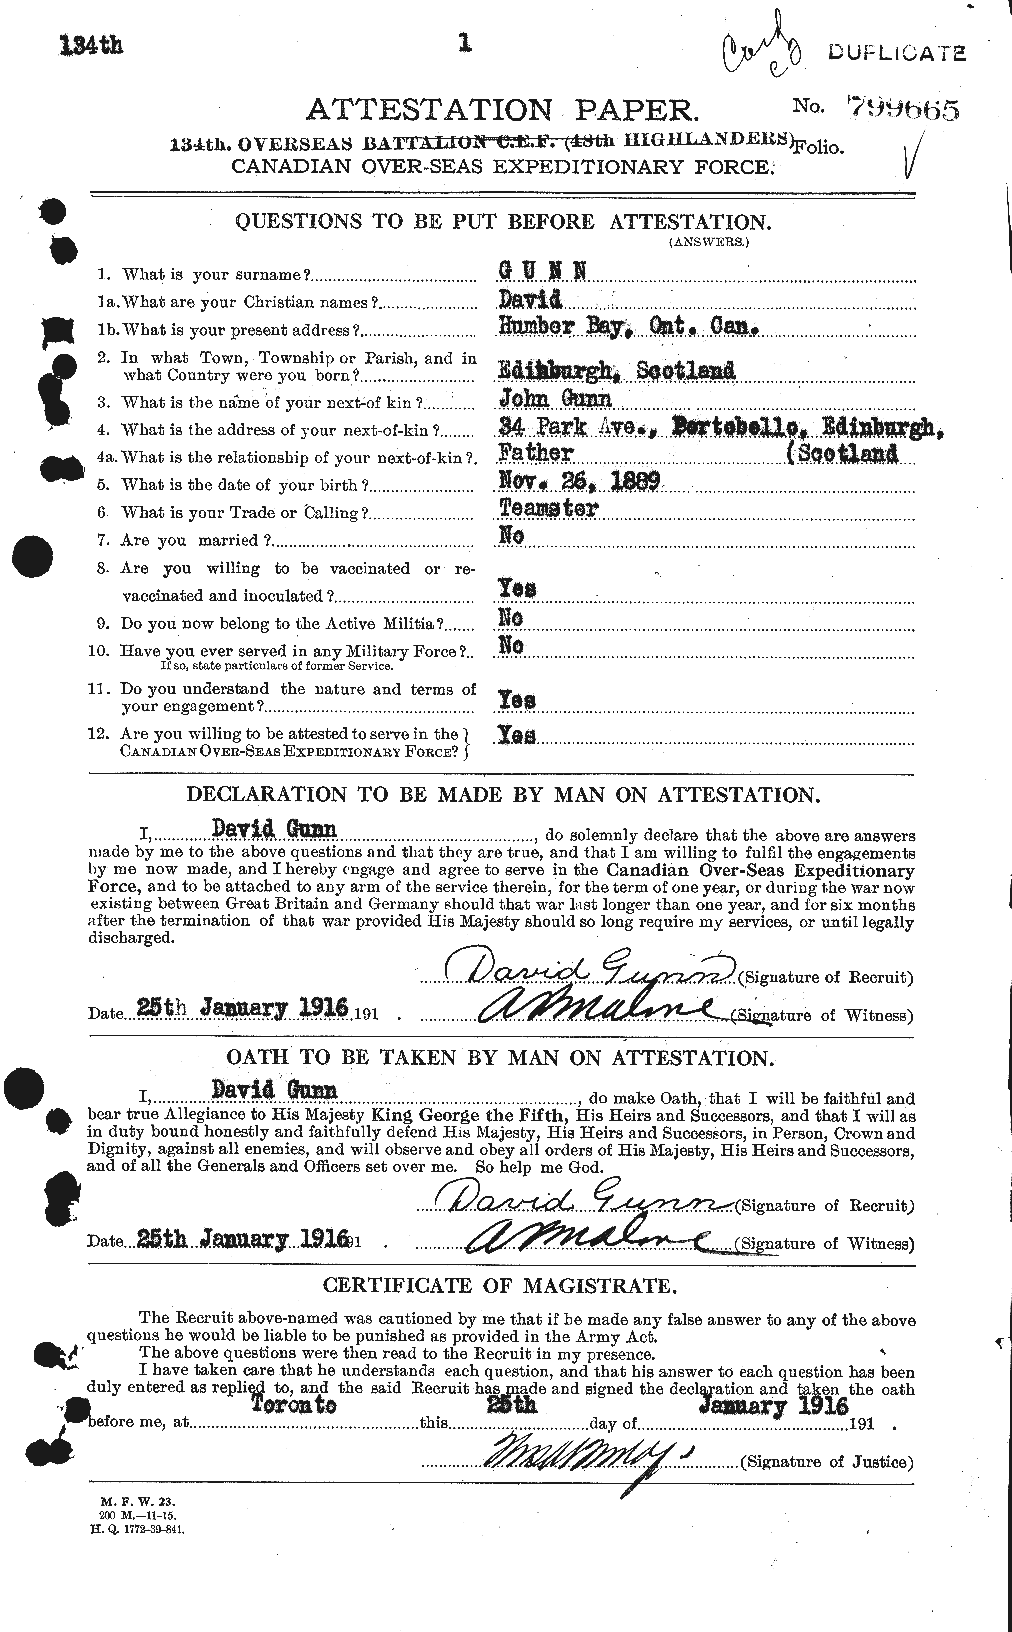 Personnel Records of the First World War - CEF 368021a